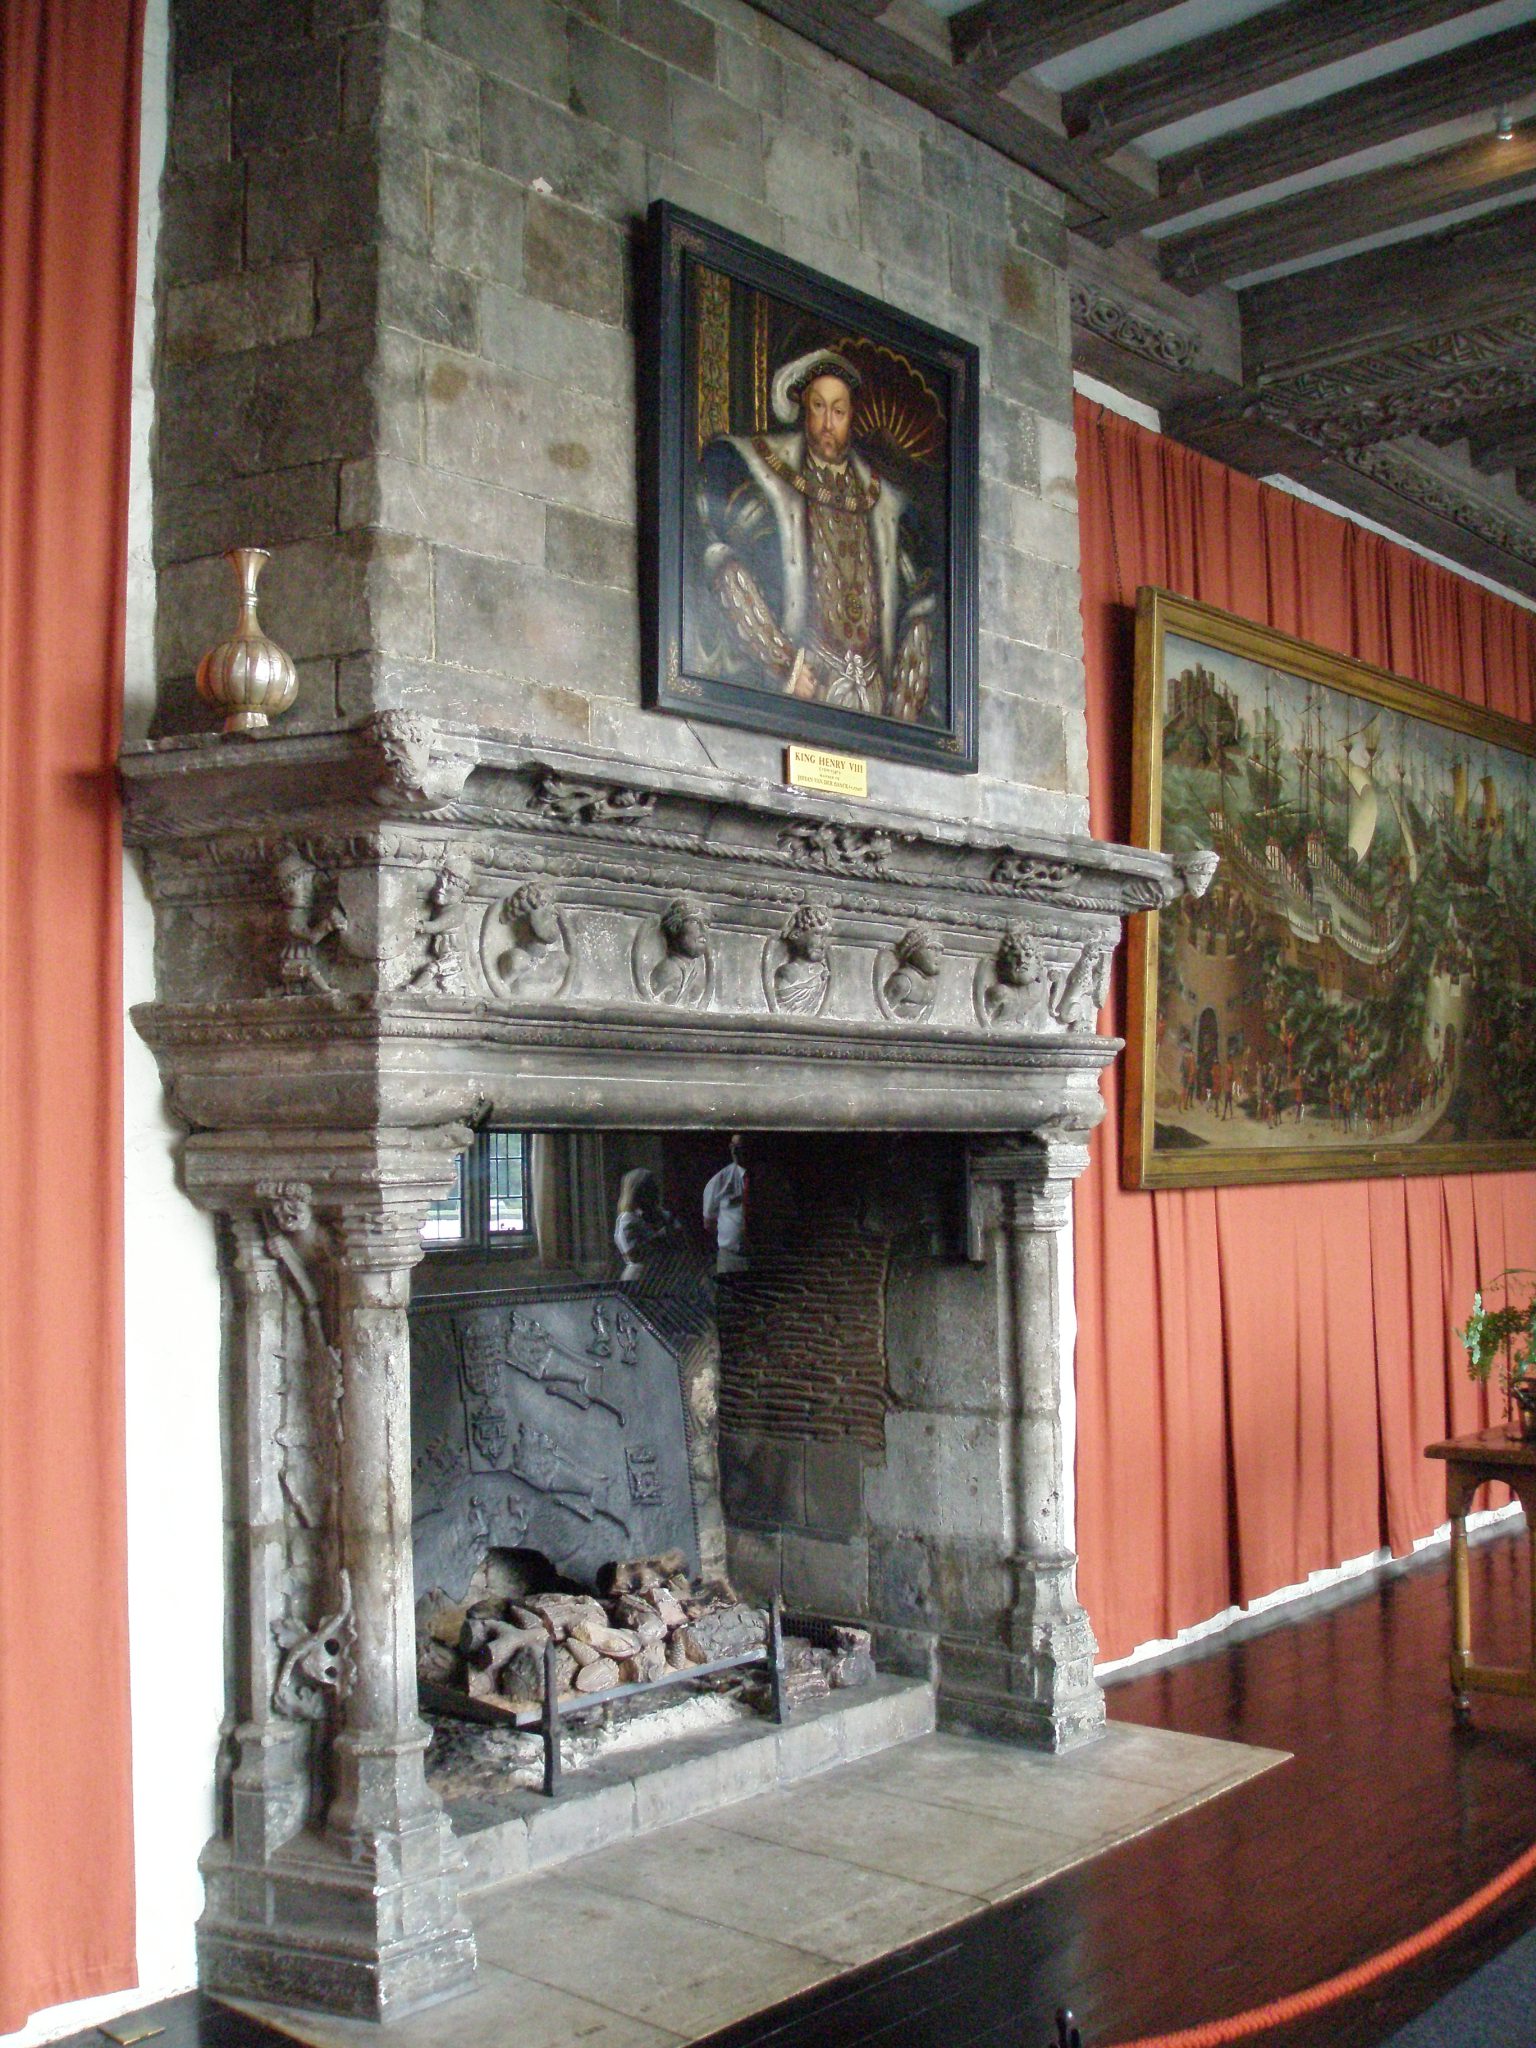 A closer look at the mantle in Henry's Banqueting Hall